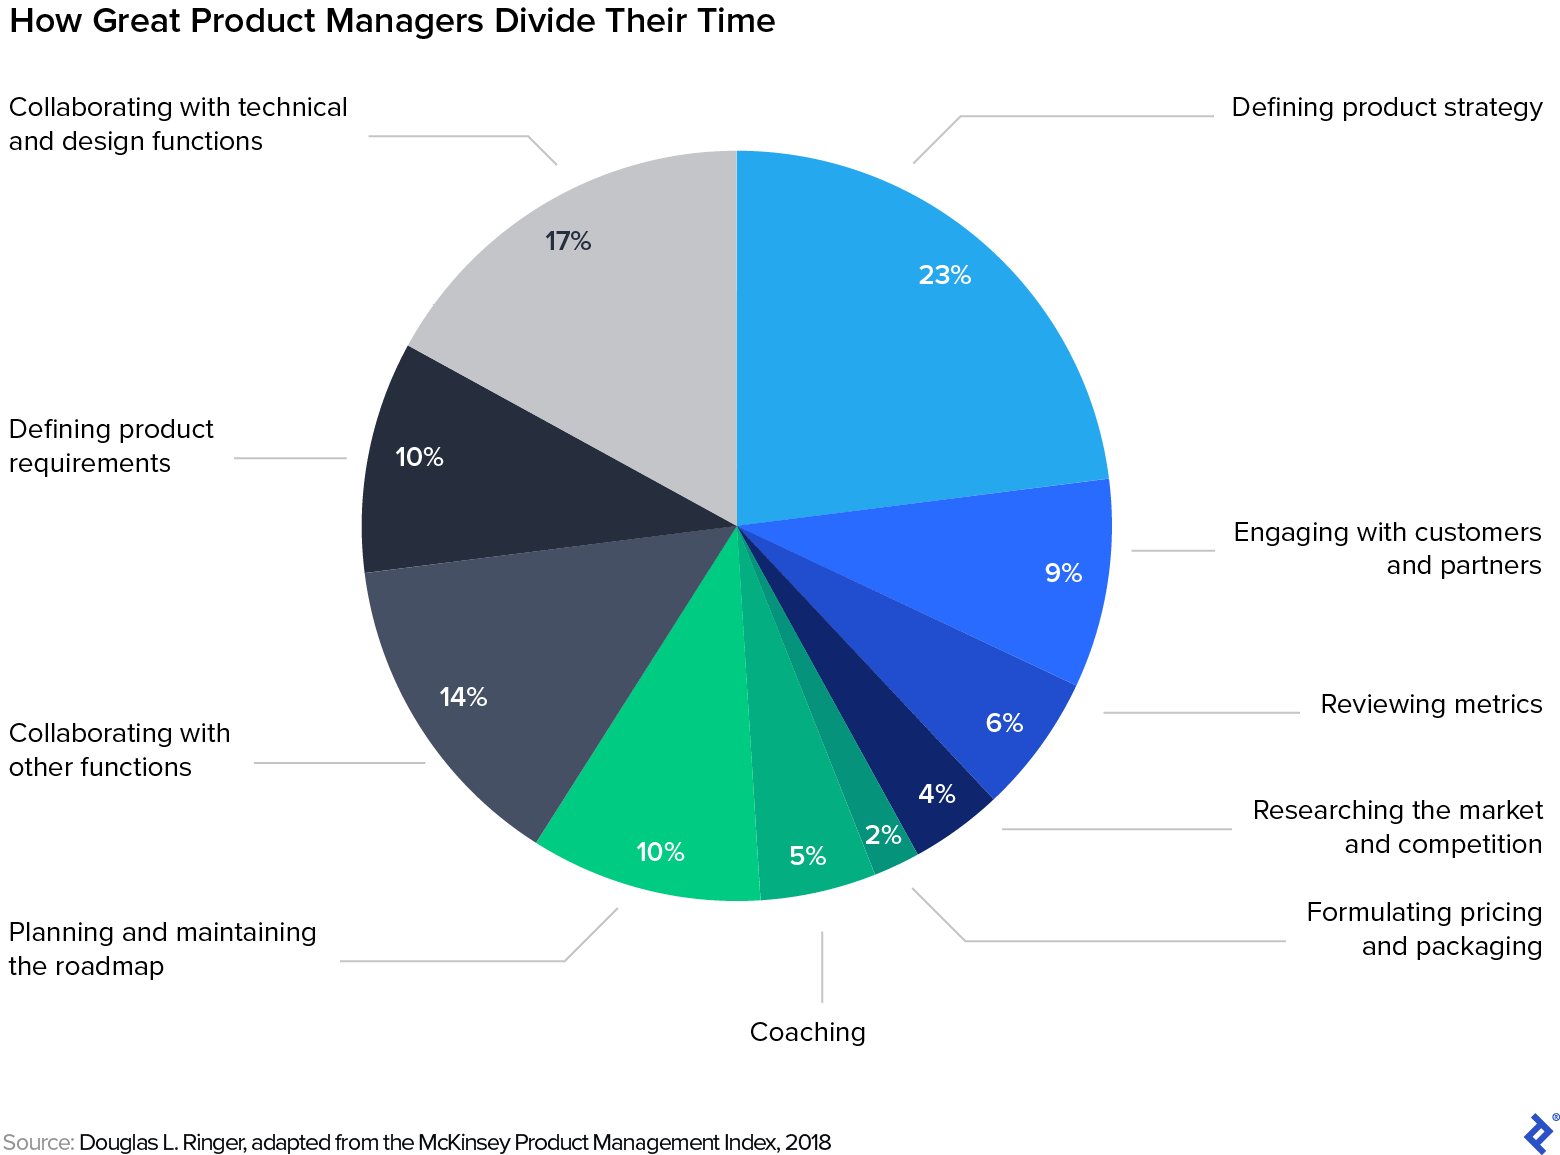 Great managers divide their time among tasks such as defining product strategy, collaborating with other functions, and engaging with customers.